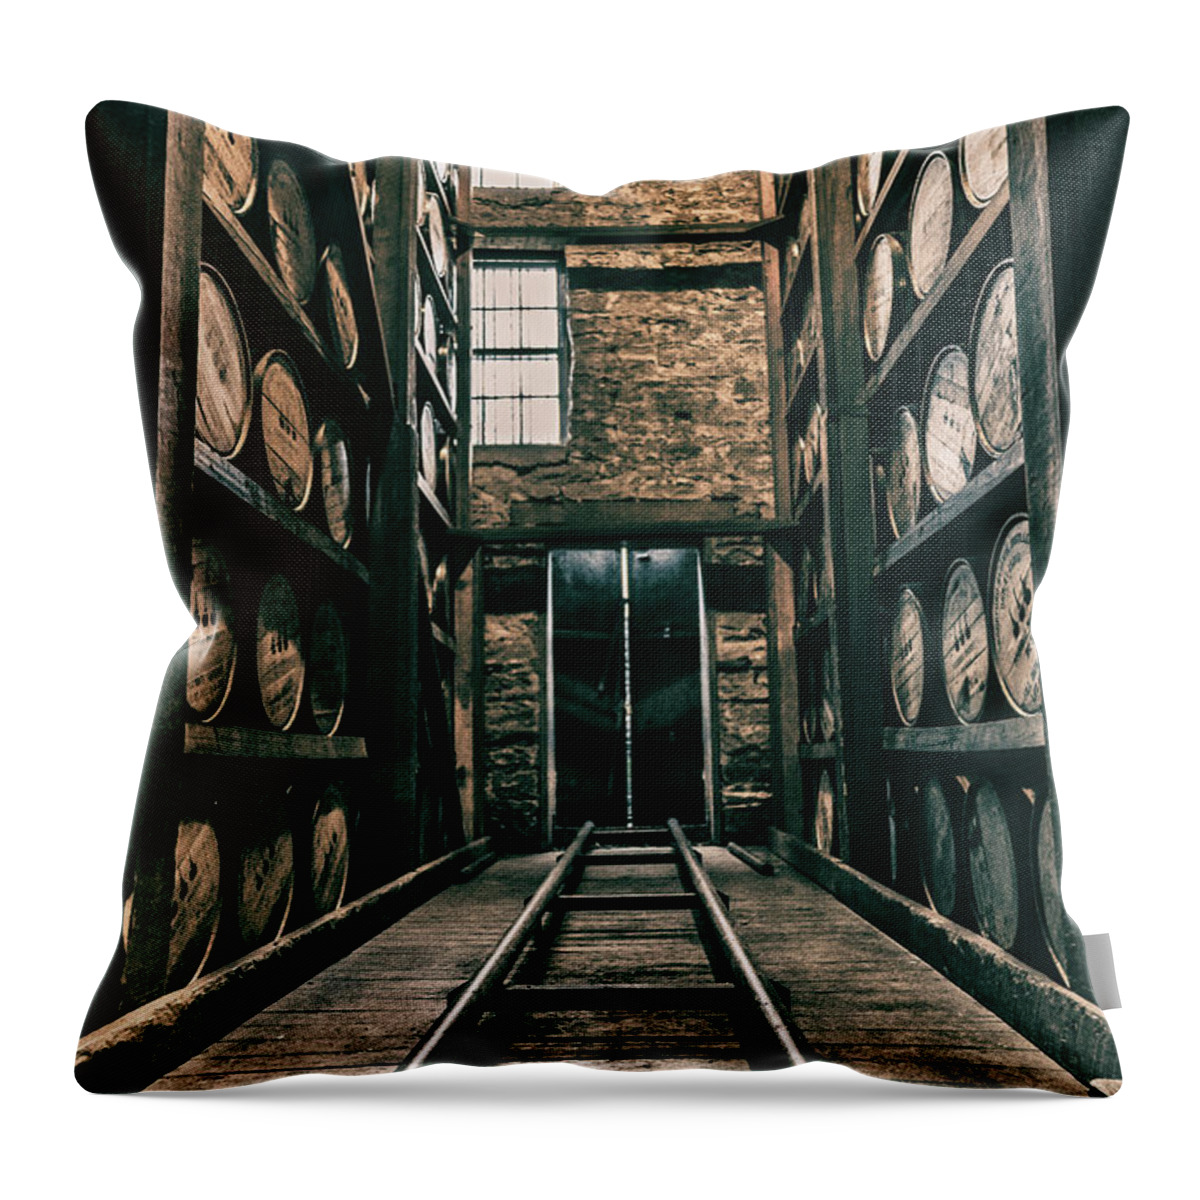  Throw Pillow featuring the photograph Rolling Barrel by Joseph Caban